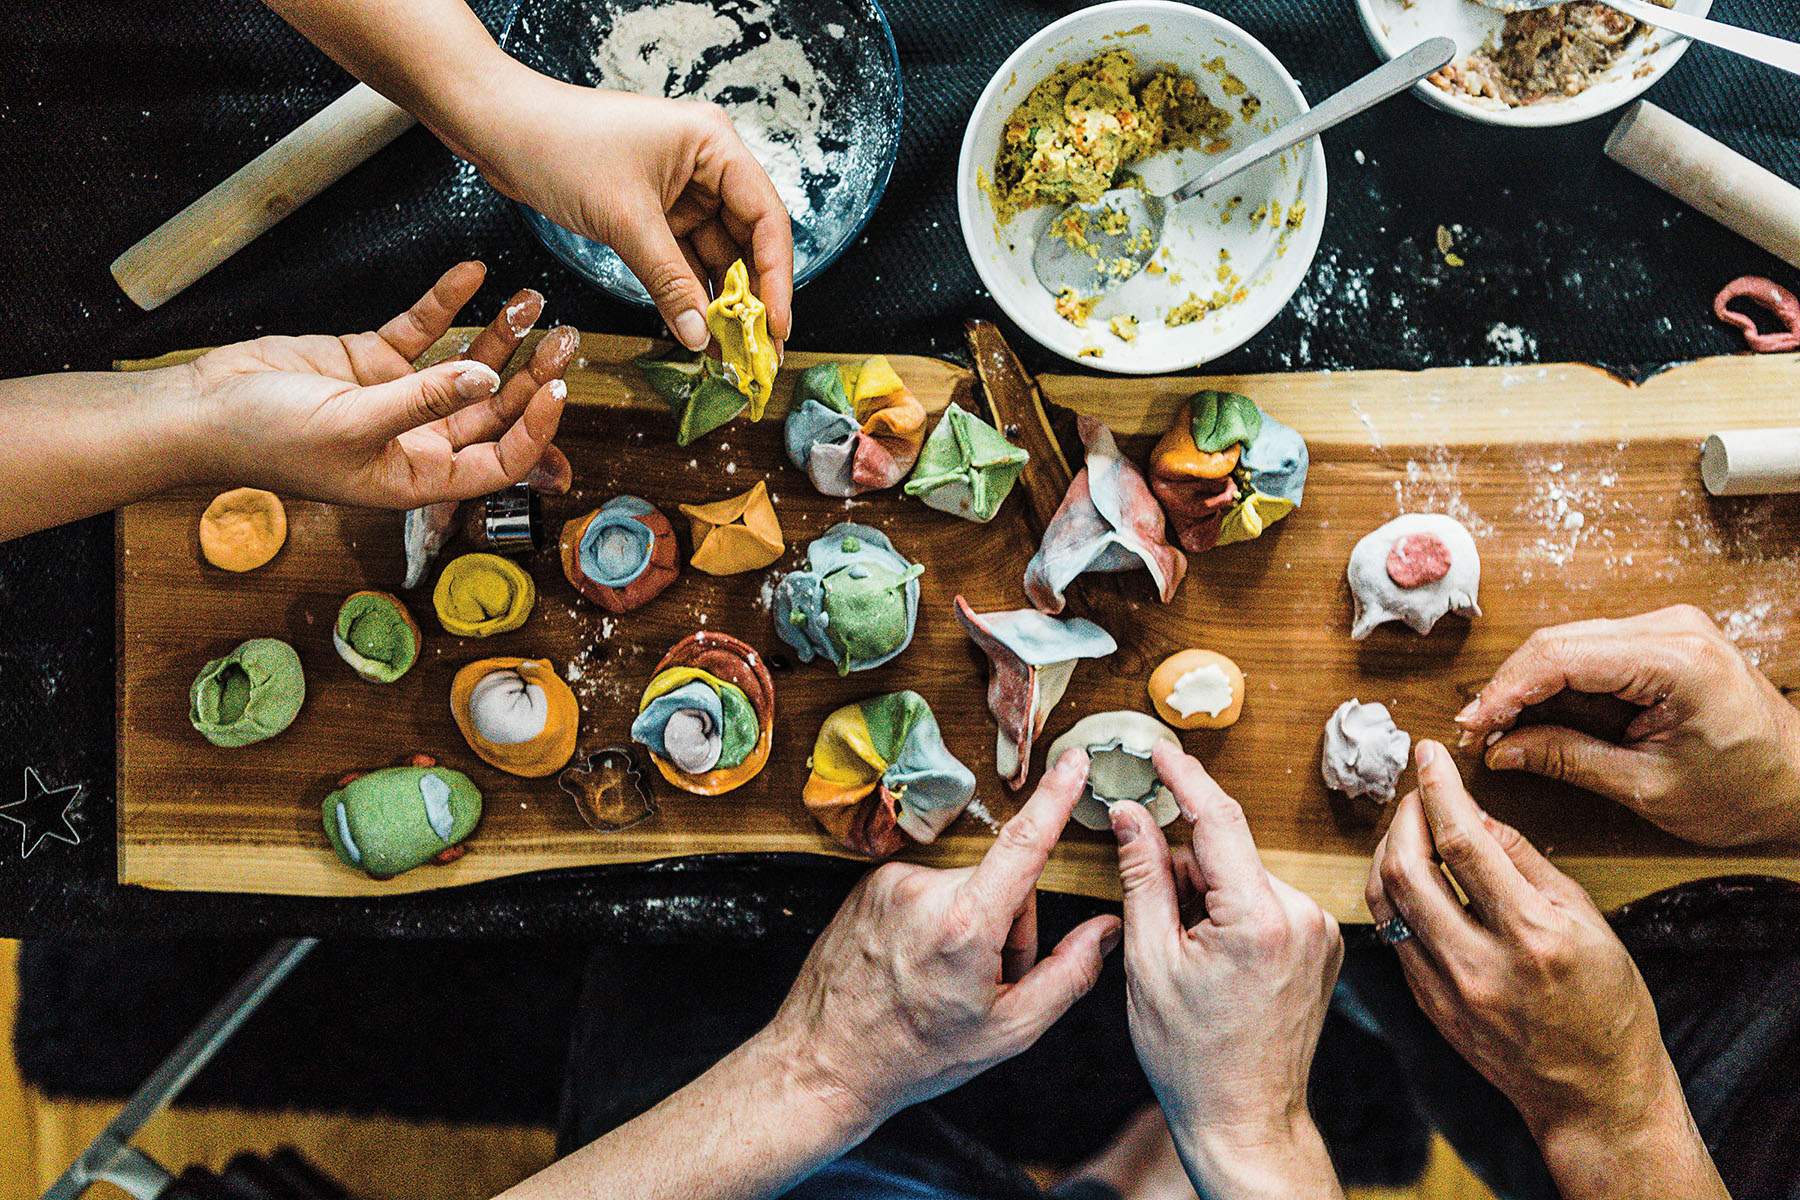 An overhead view of people folding colorful dumplings on a wooden work table